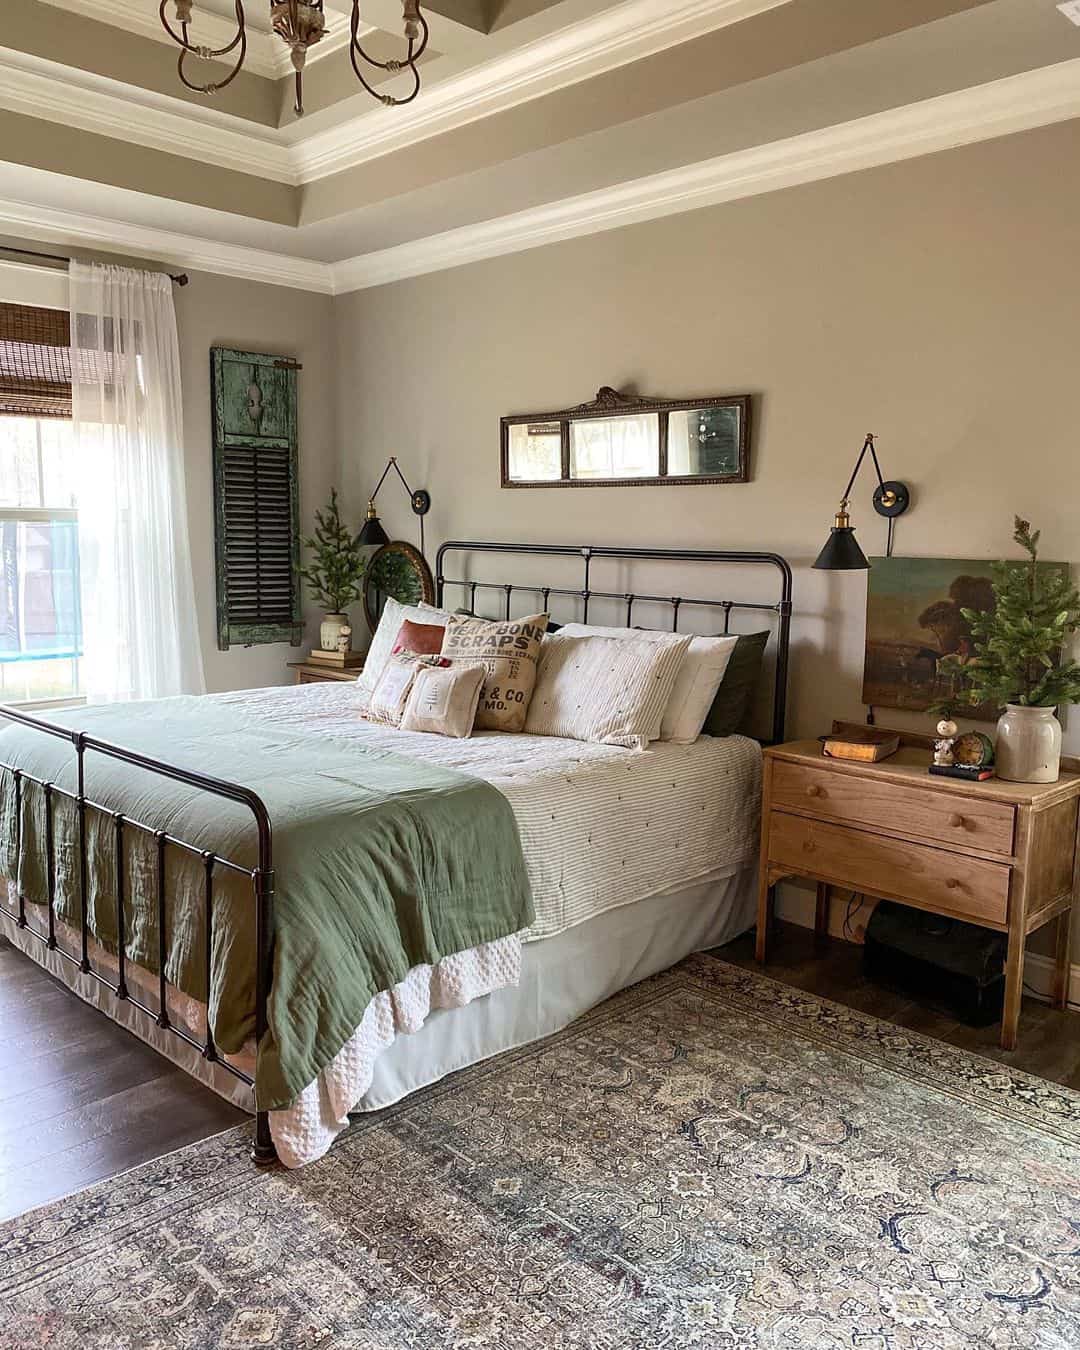 Vintage-Inspired Bedroom With Gray and White Coffered Ceilings